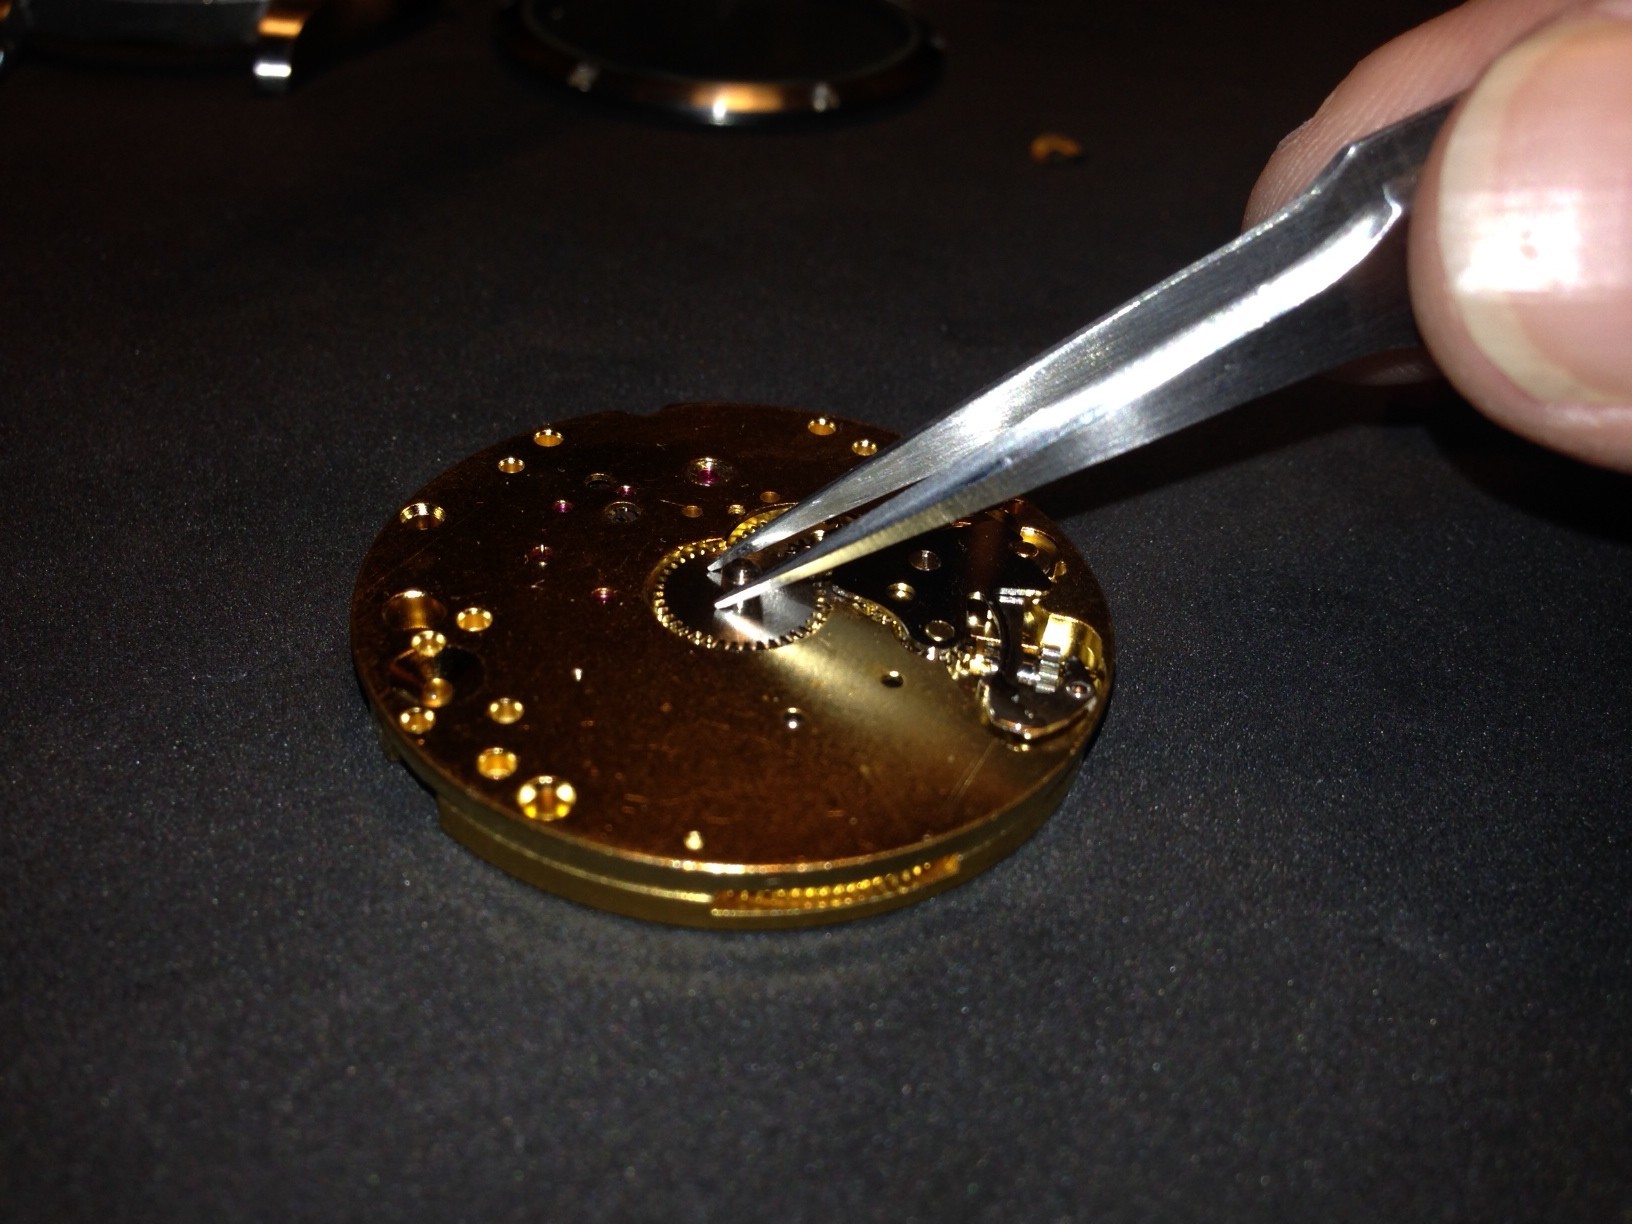 How to build your own mechanical watch - Install the hour wheel and dial washer